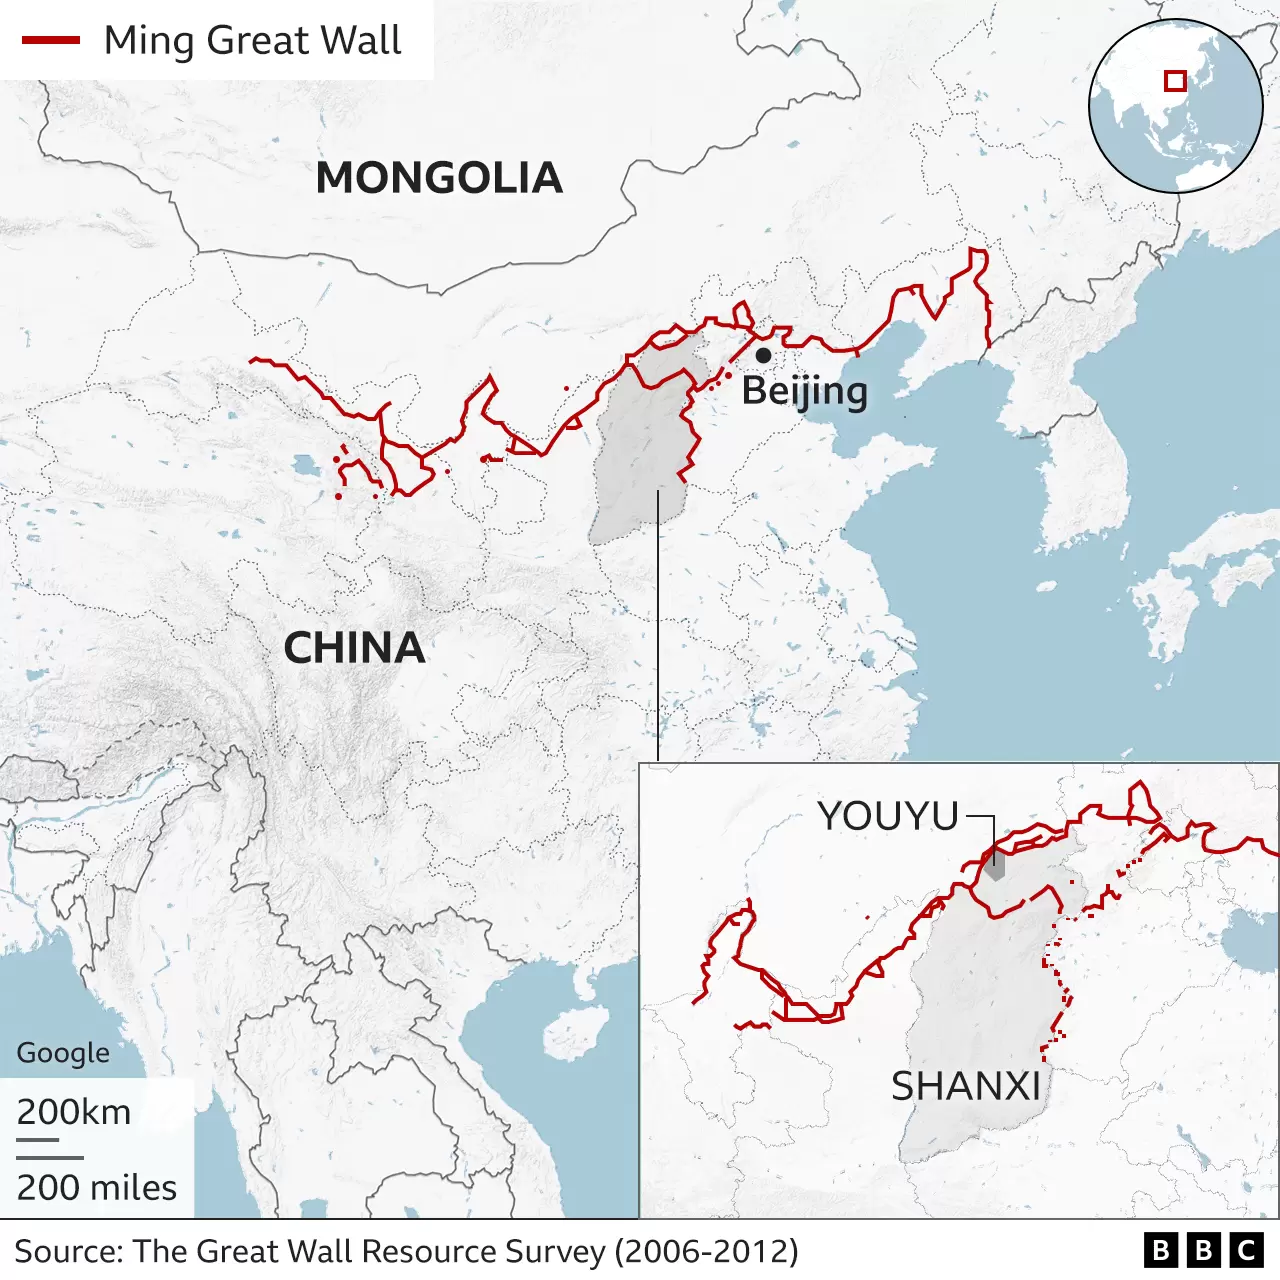 Workers tore a huge hole in the Great Wall of China to cut their way to work